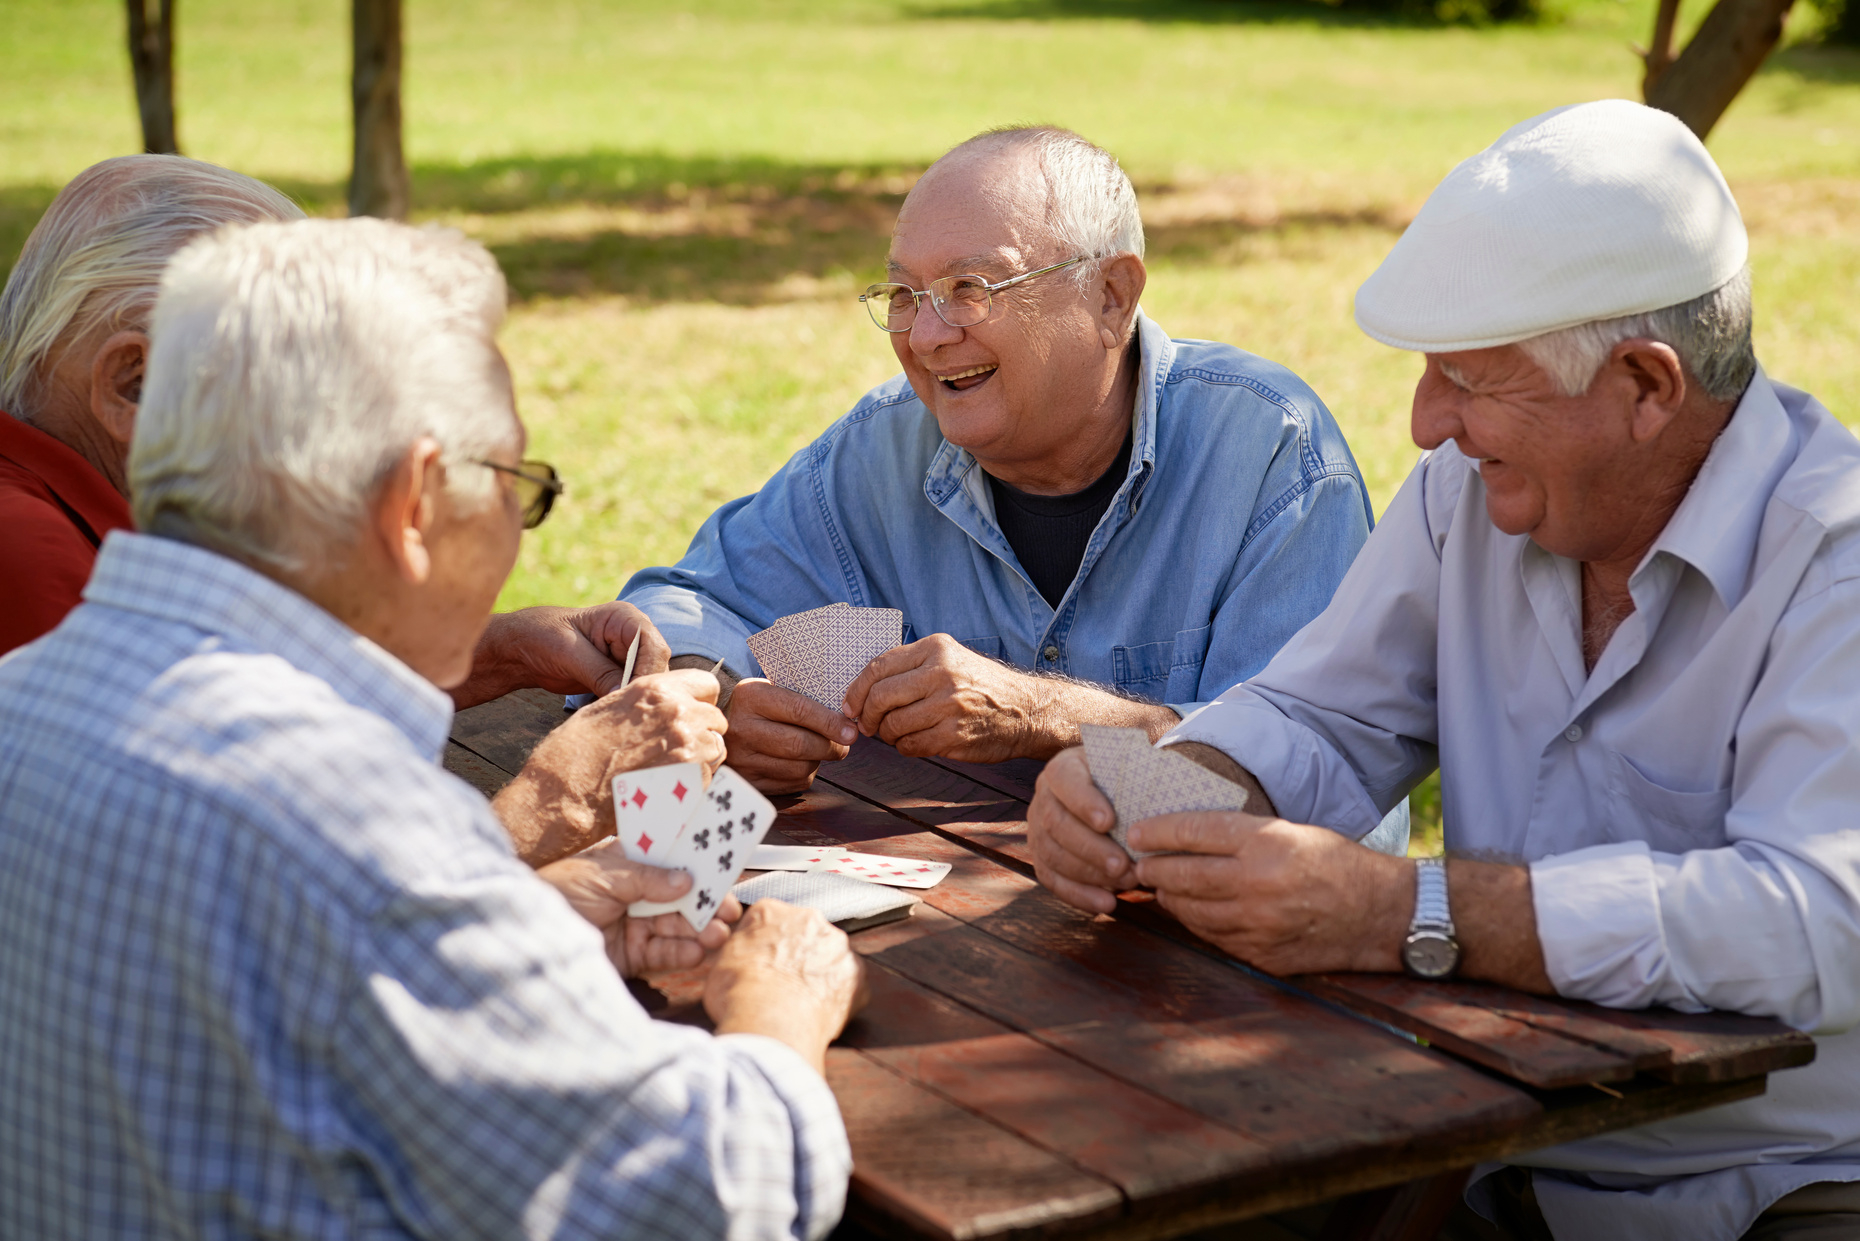 Group of Old Friends Playing Cards at Park